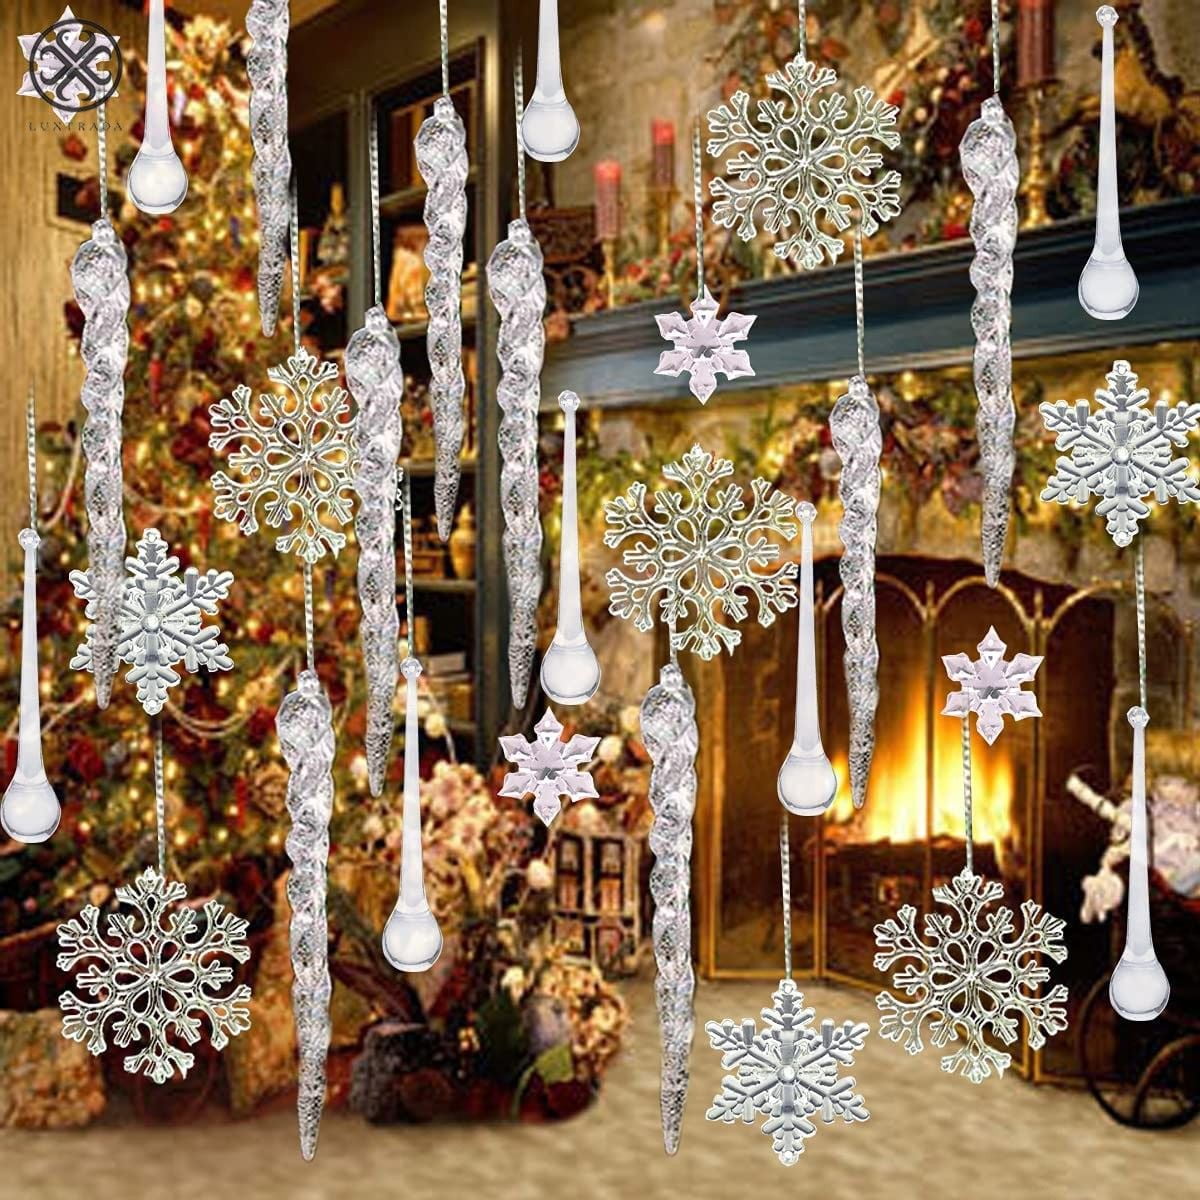 9in Large Arcylic Snowflakes Christmas Ornaments Lee Display Shop